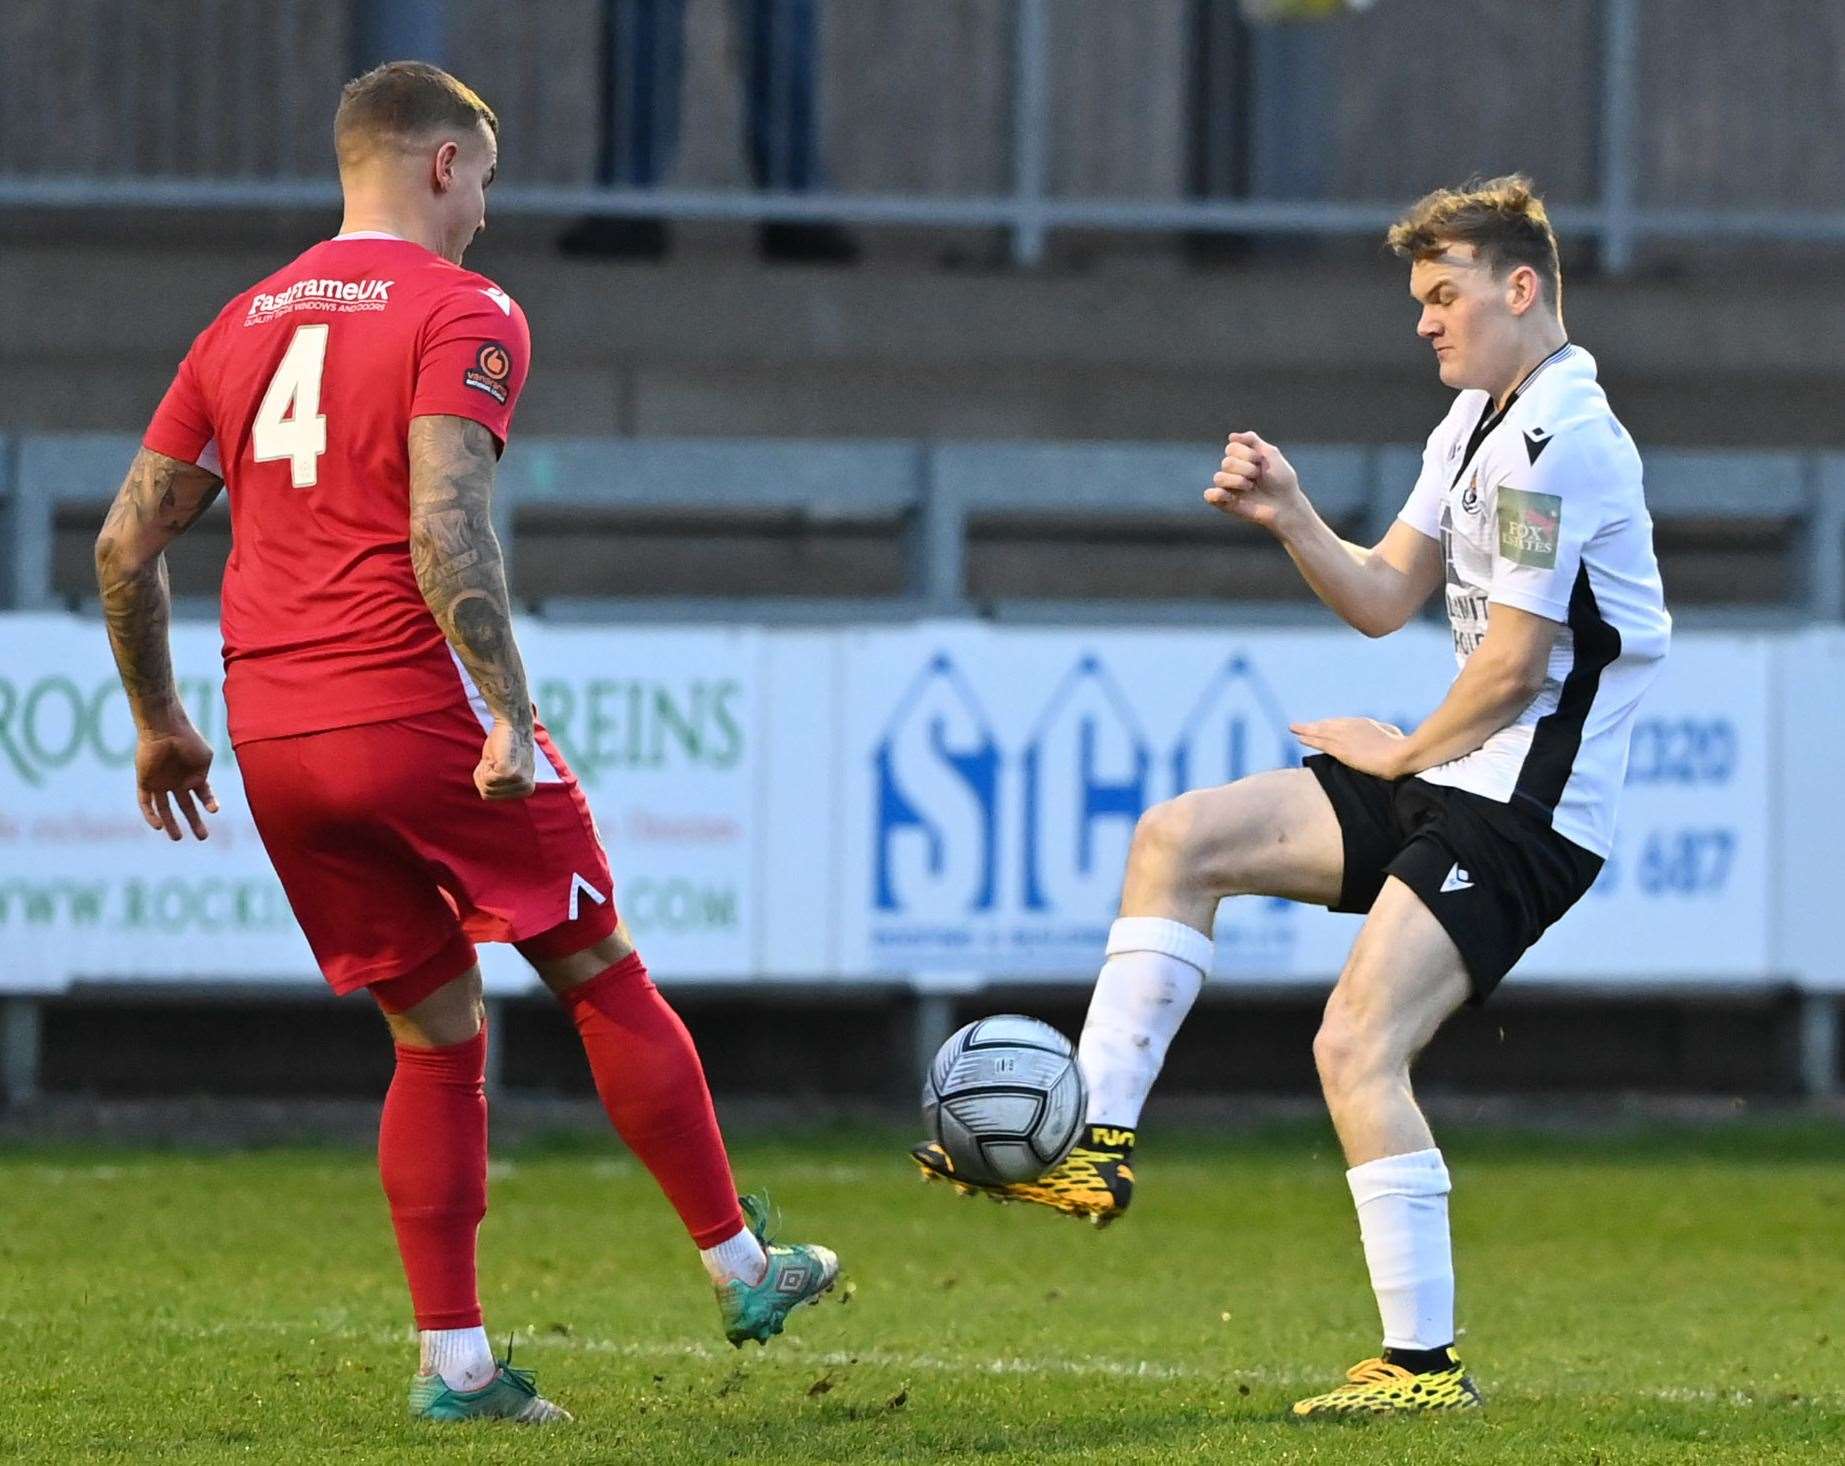 Dartford's Cameron Brodie came on at right-back against Hungerford. Picture: Keith Gillard